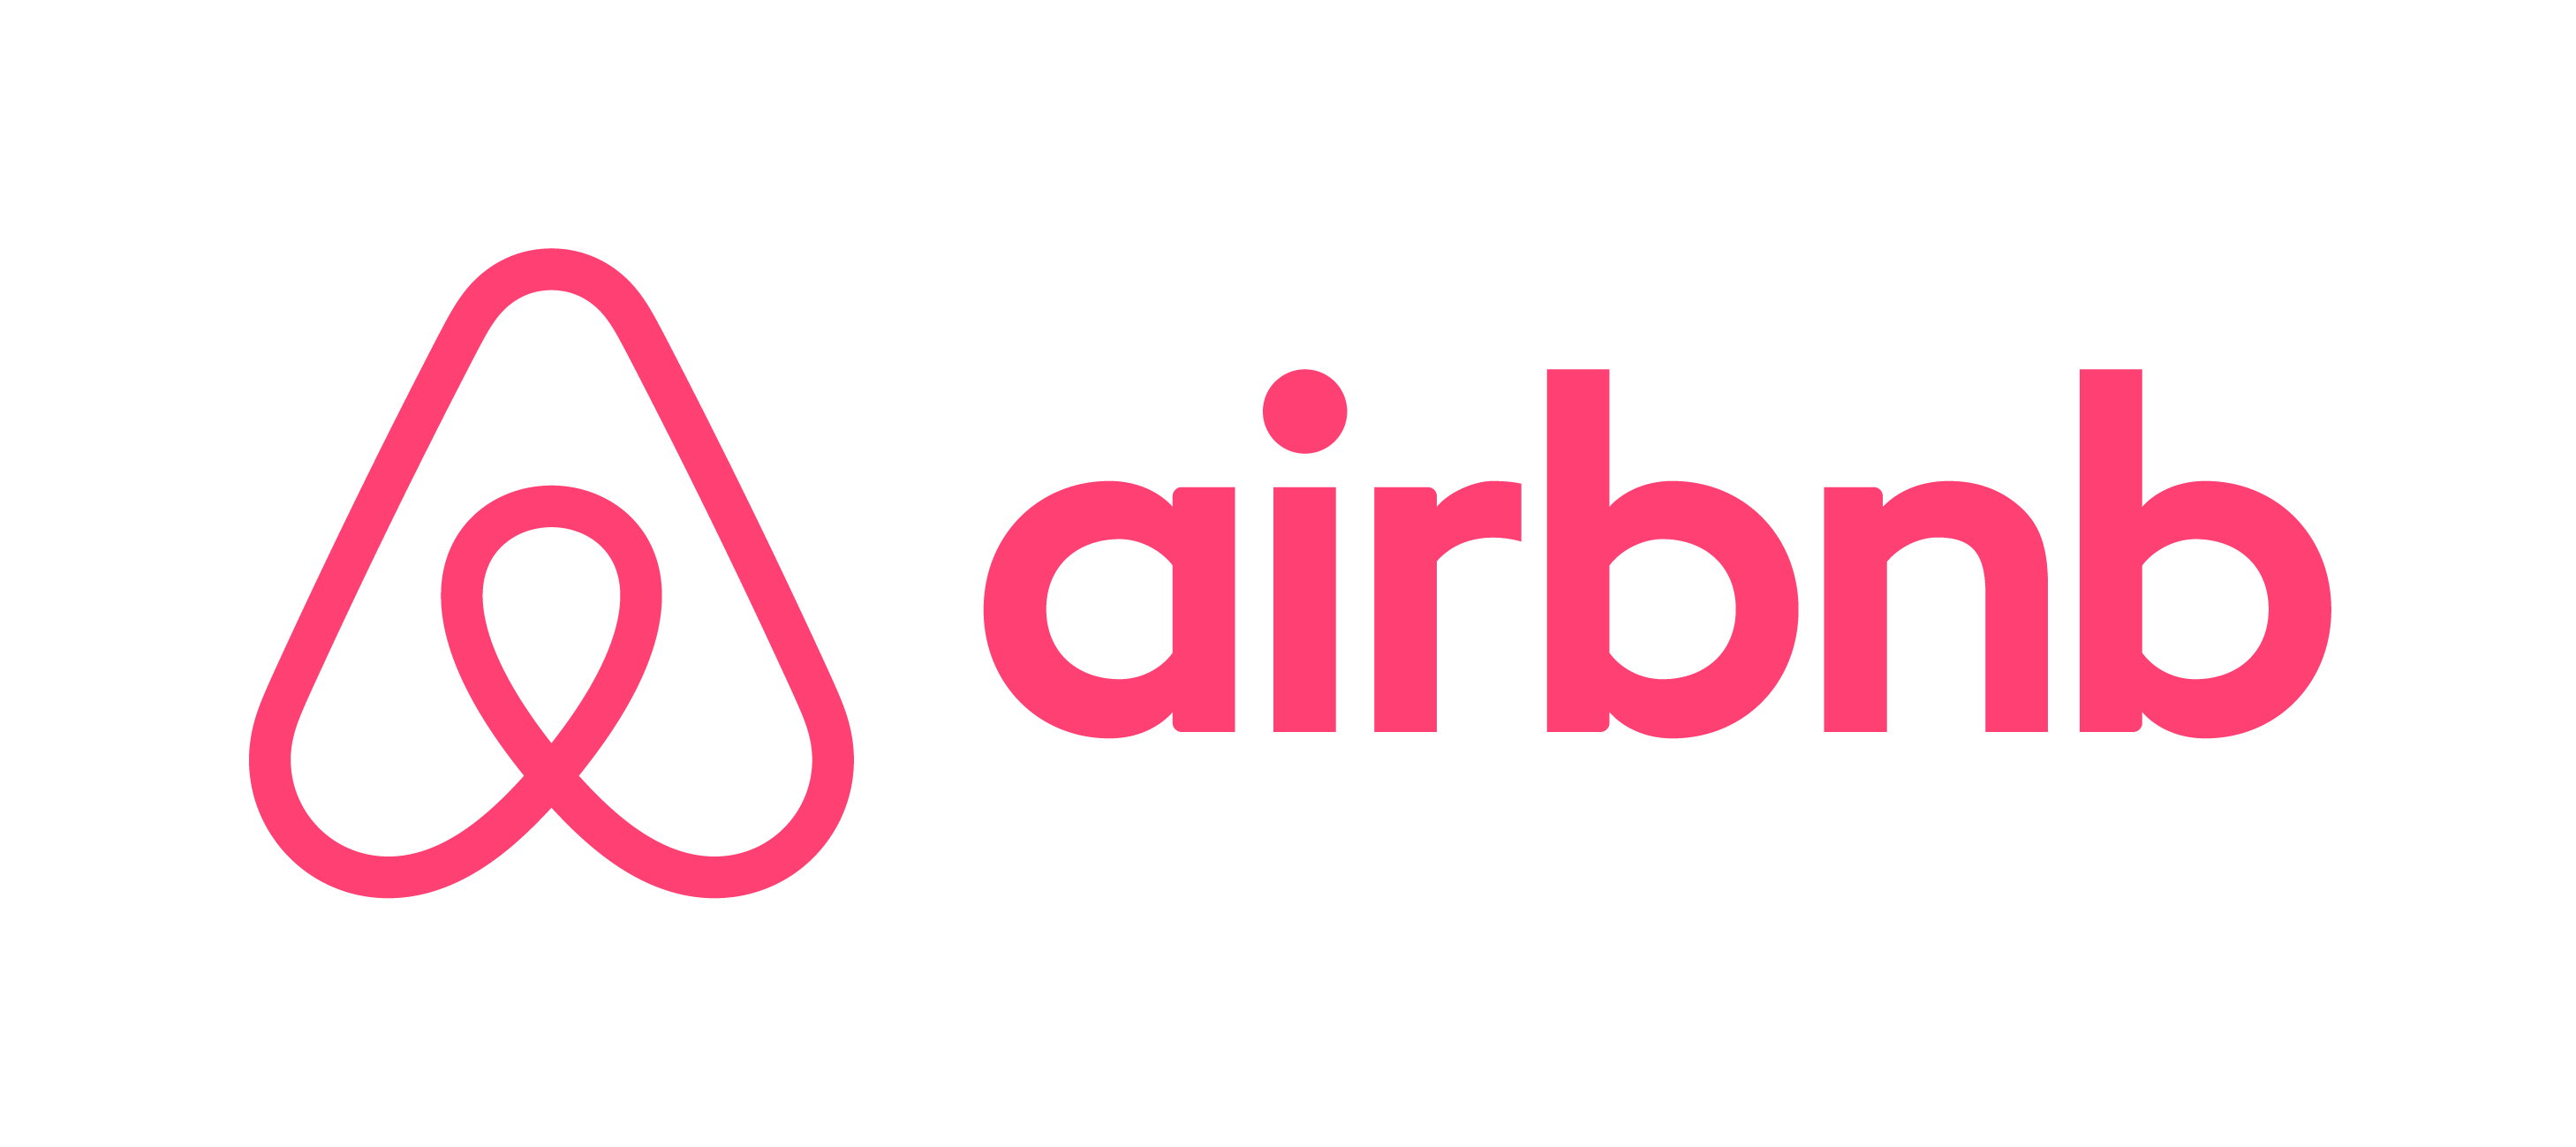 Taking the Air out of Airbnb